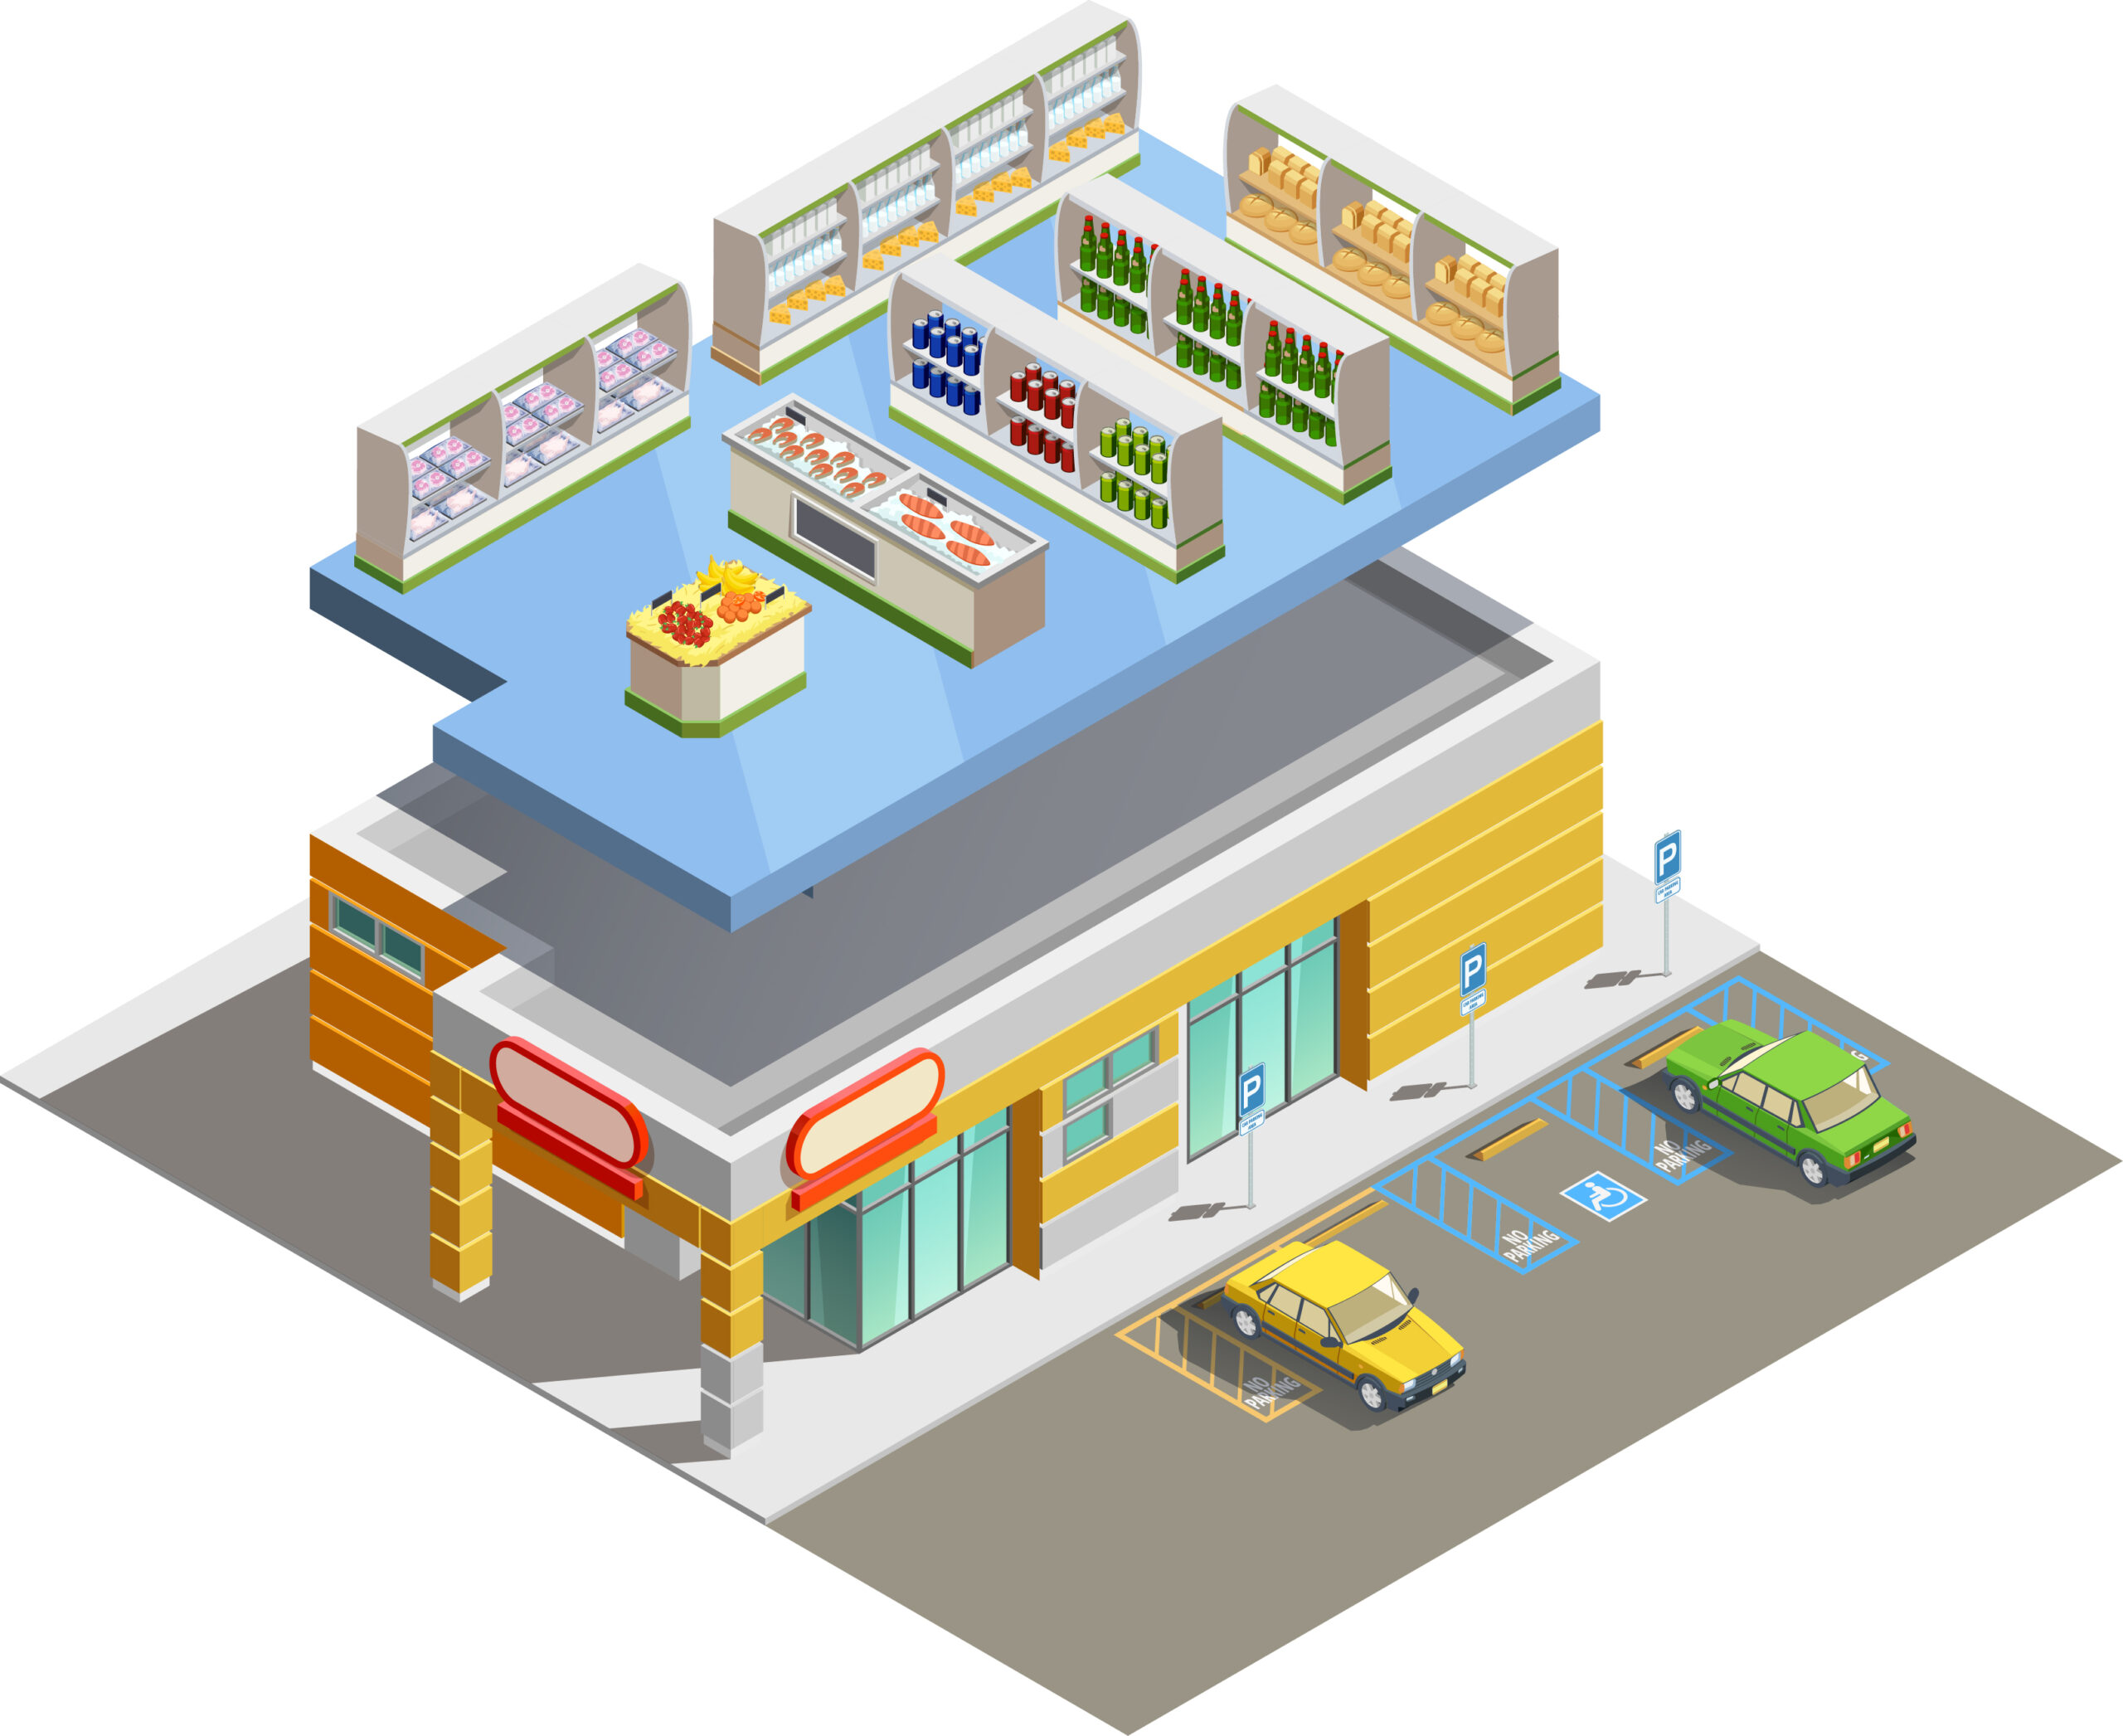 Supermarket store building exterior and interior ground floor composition isometric view with adjacent parking lot vector illustration